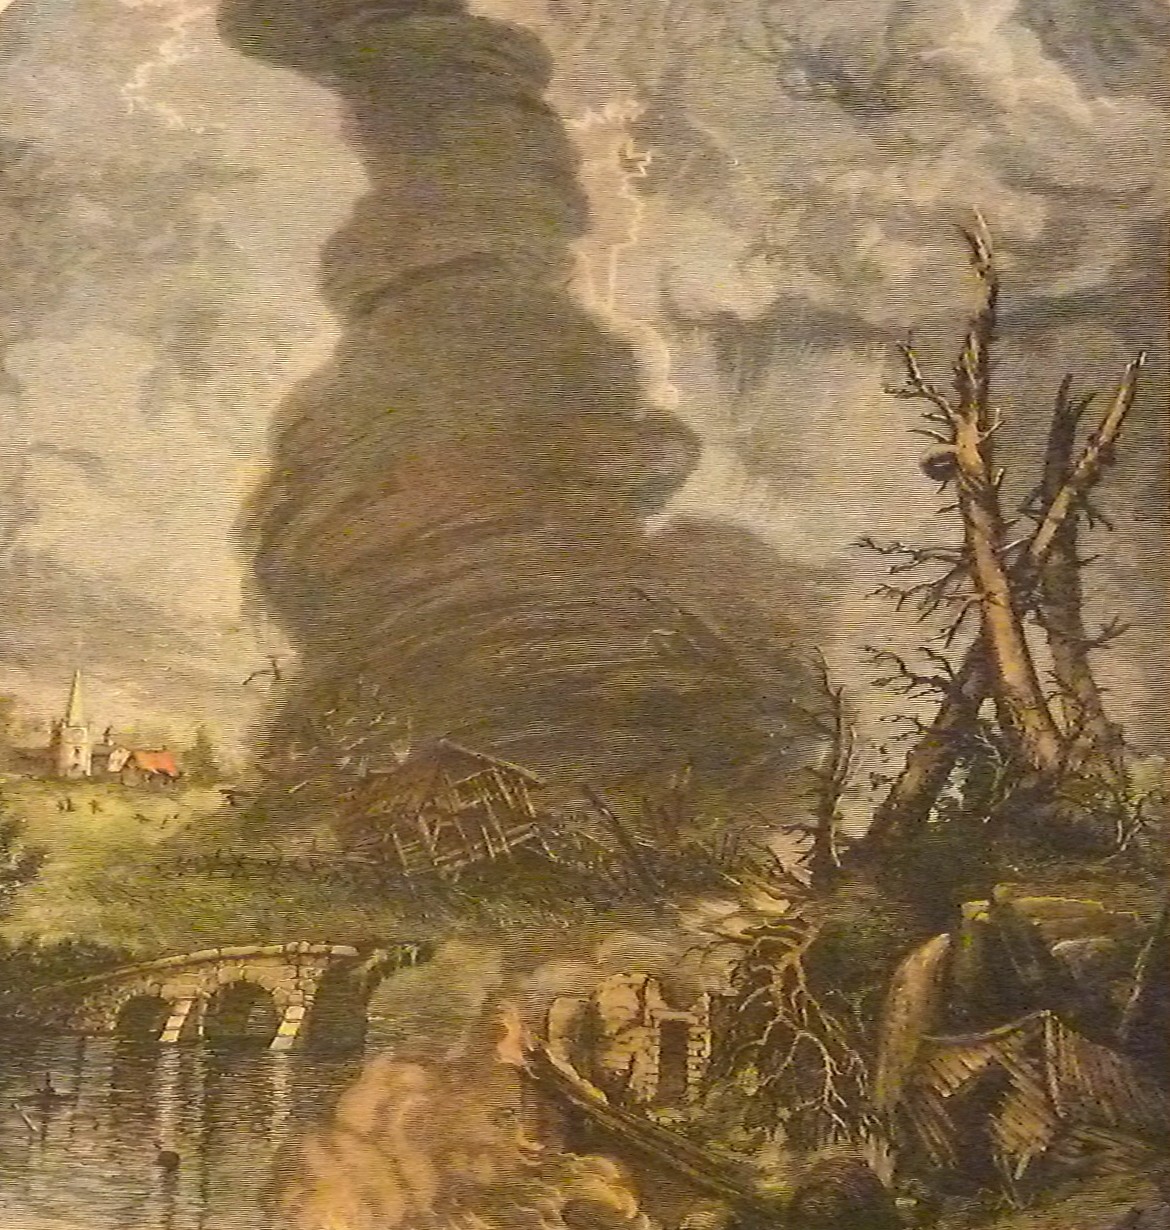 Tornado - GERMAN ETCHING, DONE BY AN ARTIST WHO'D NEVER SEEN A TORNADO AND DREW IT UPSIDE-DOWN